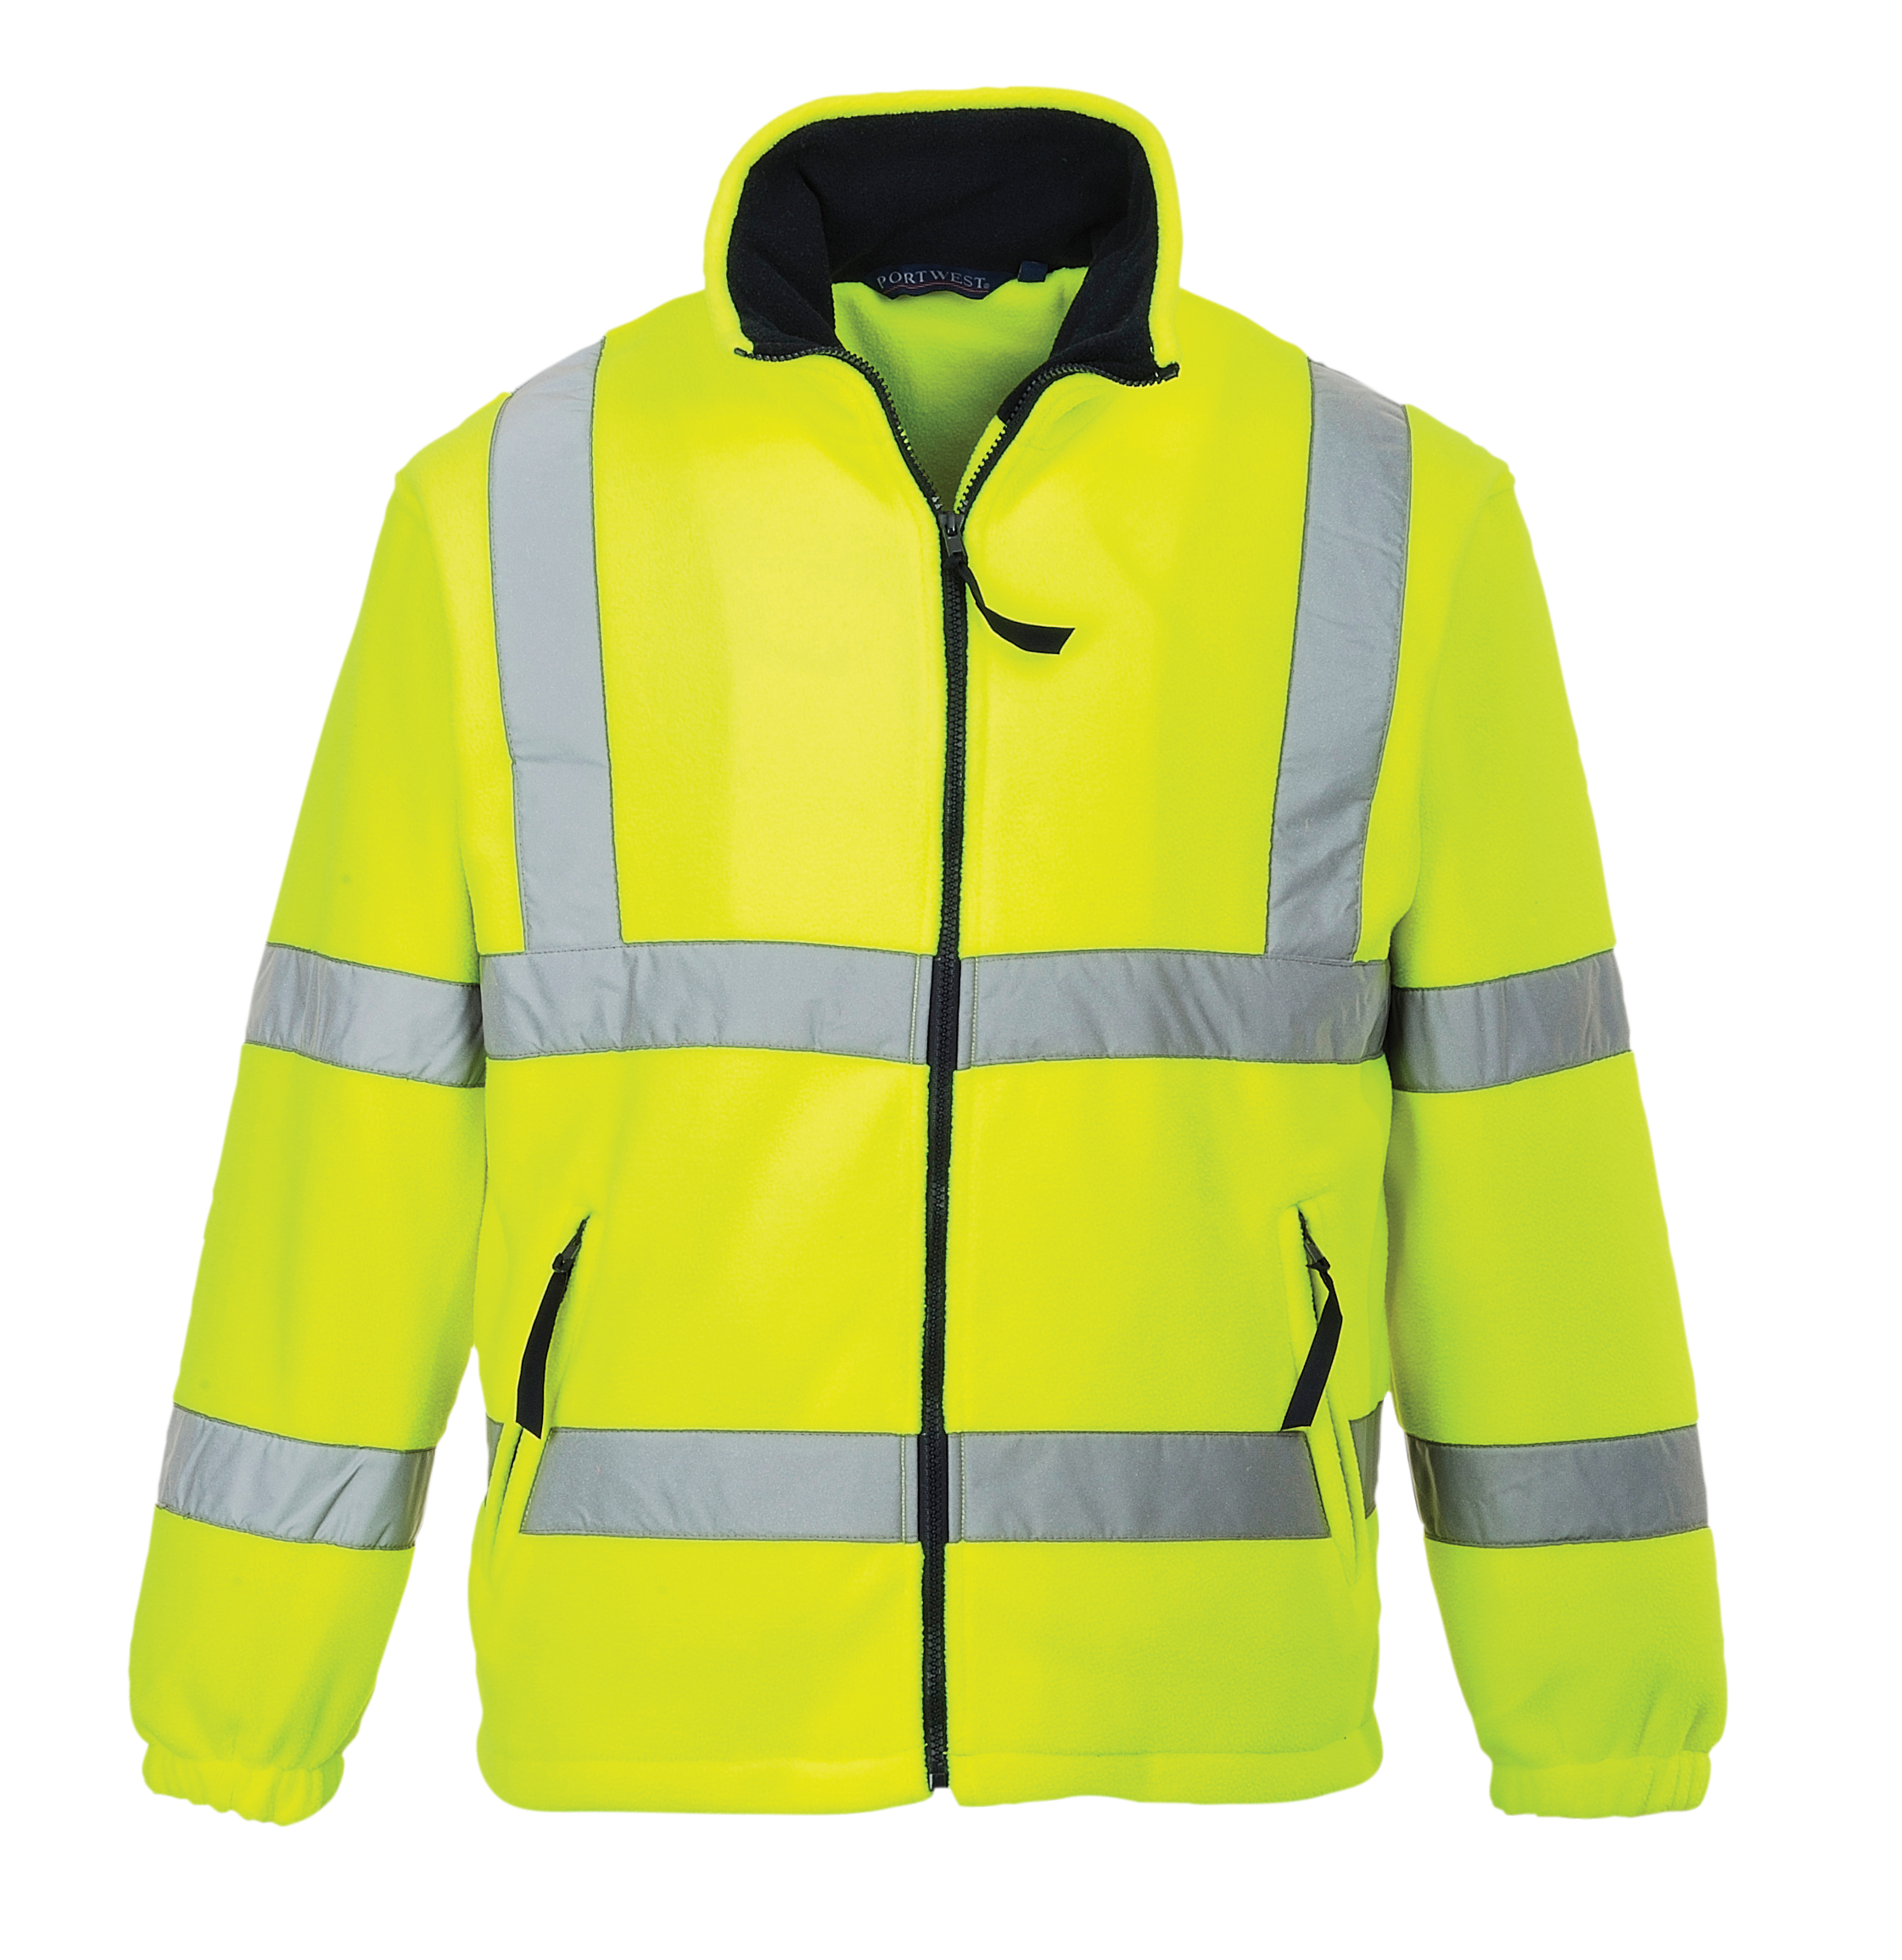 Portwest F300 Mesh Lined High Visibility Fleece-0